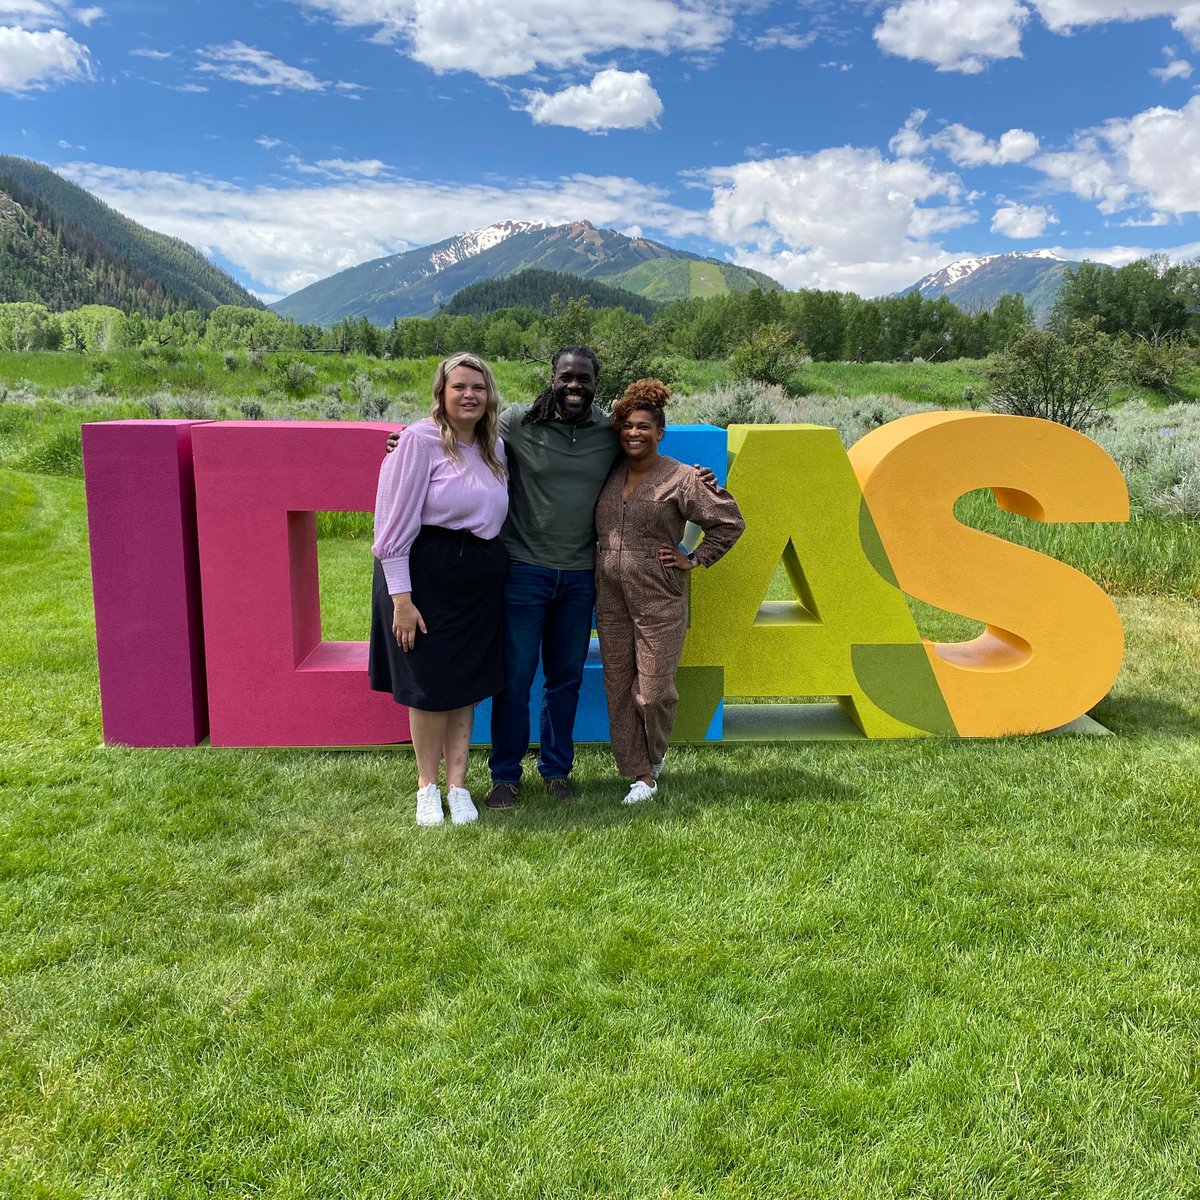 We had a great time attending @Aspenideas with Jumpstart Nova and JHI teams last week! The world of healthcare is always evolving & we're proud that two of our JSN founders are Aspen Ideas Fellows-- Melanie Igwe of ViuHealth & Javier of Alerje @marcuswhitney @courtney @JSNovaVC